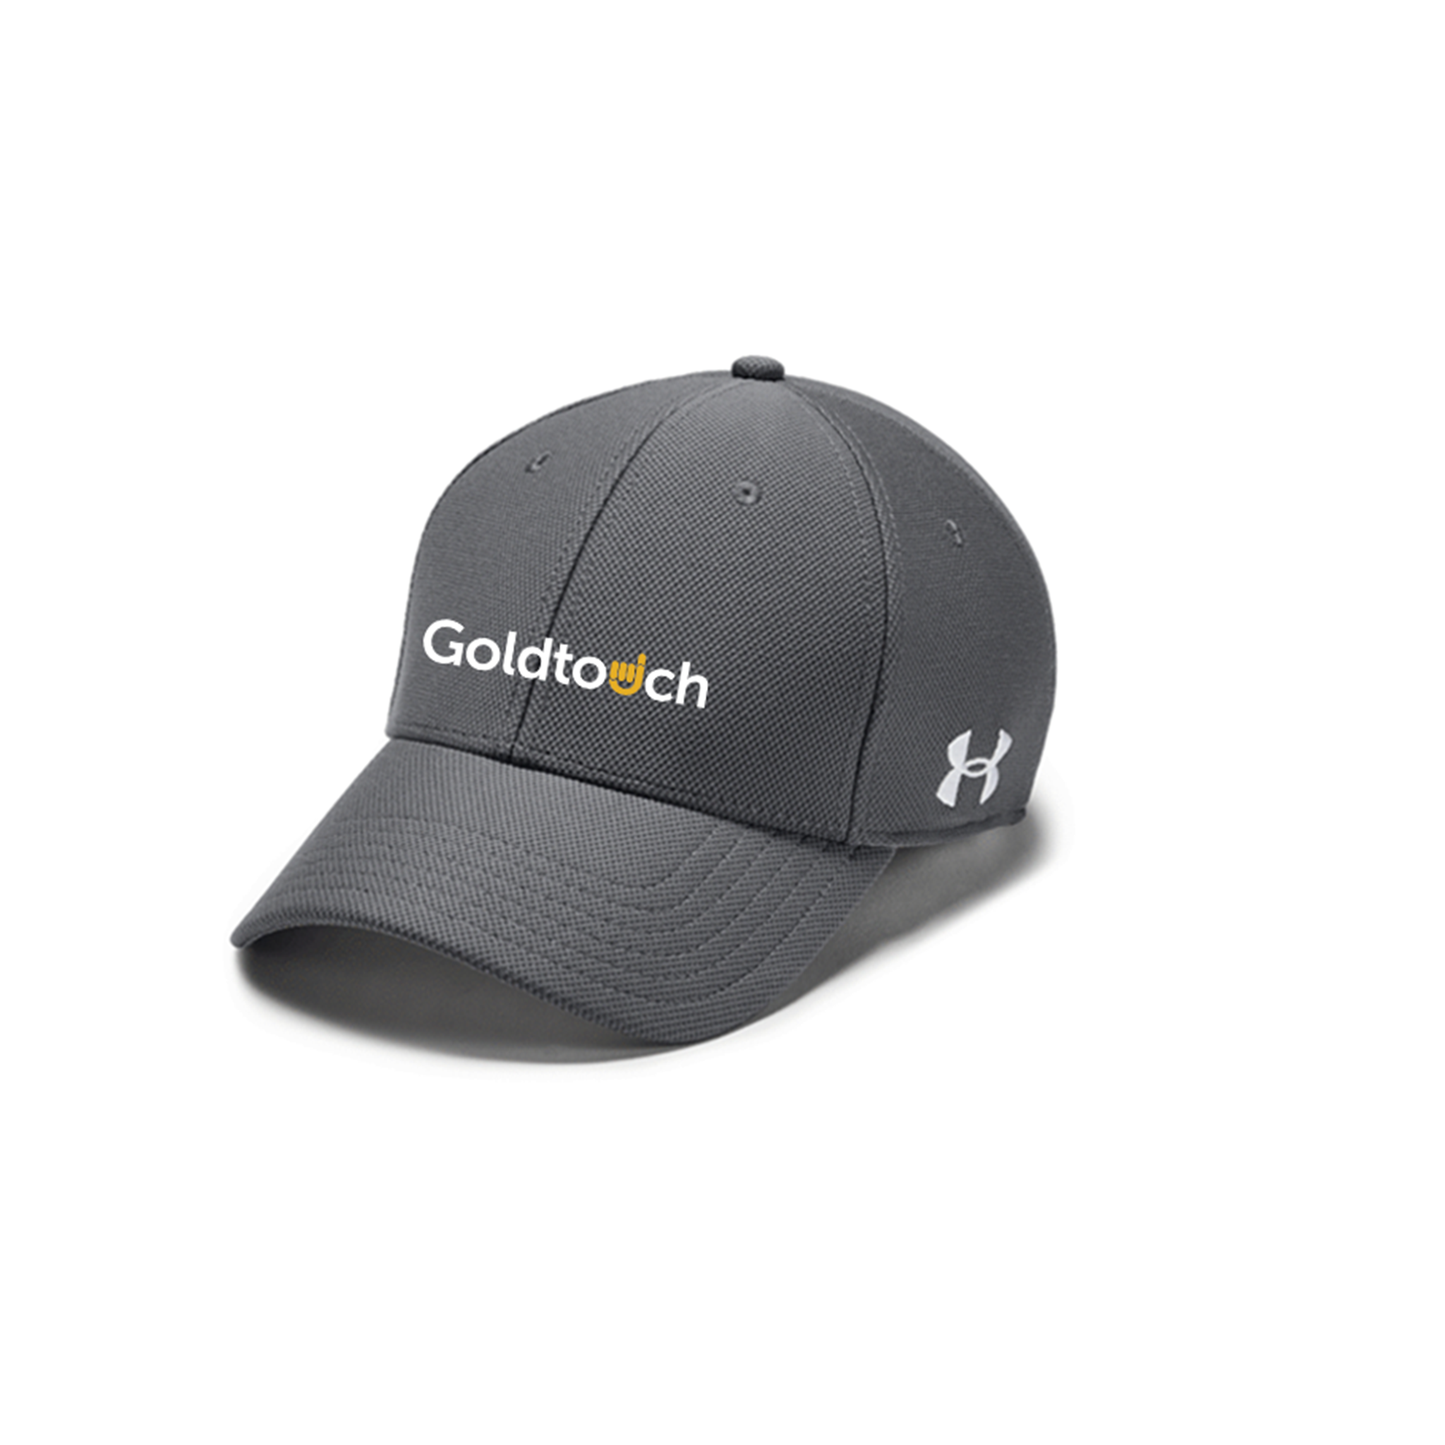 Goldtouch Hat